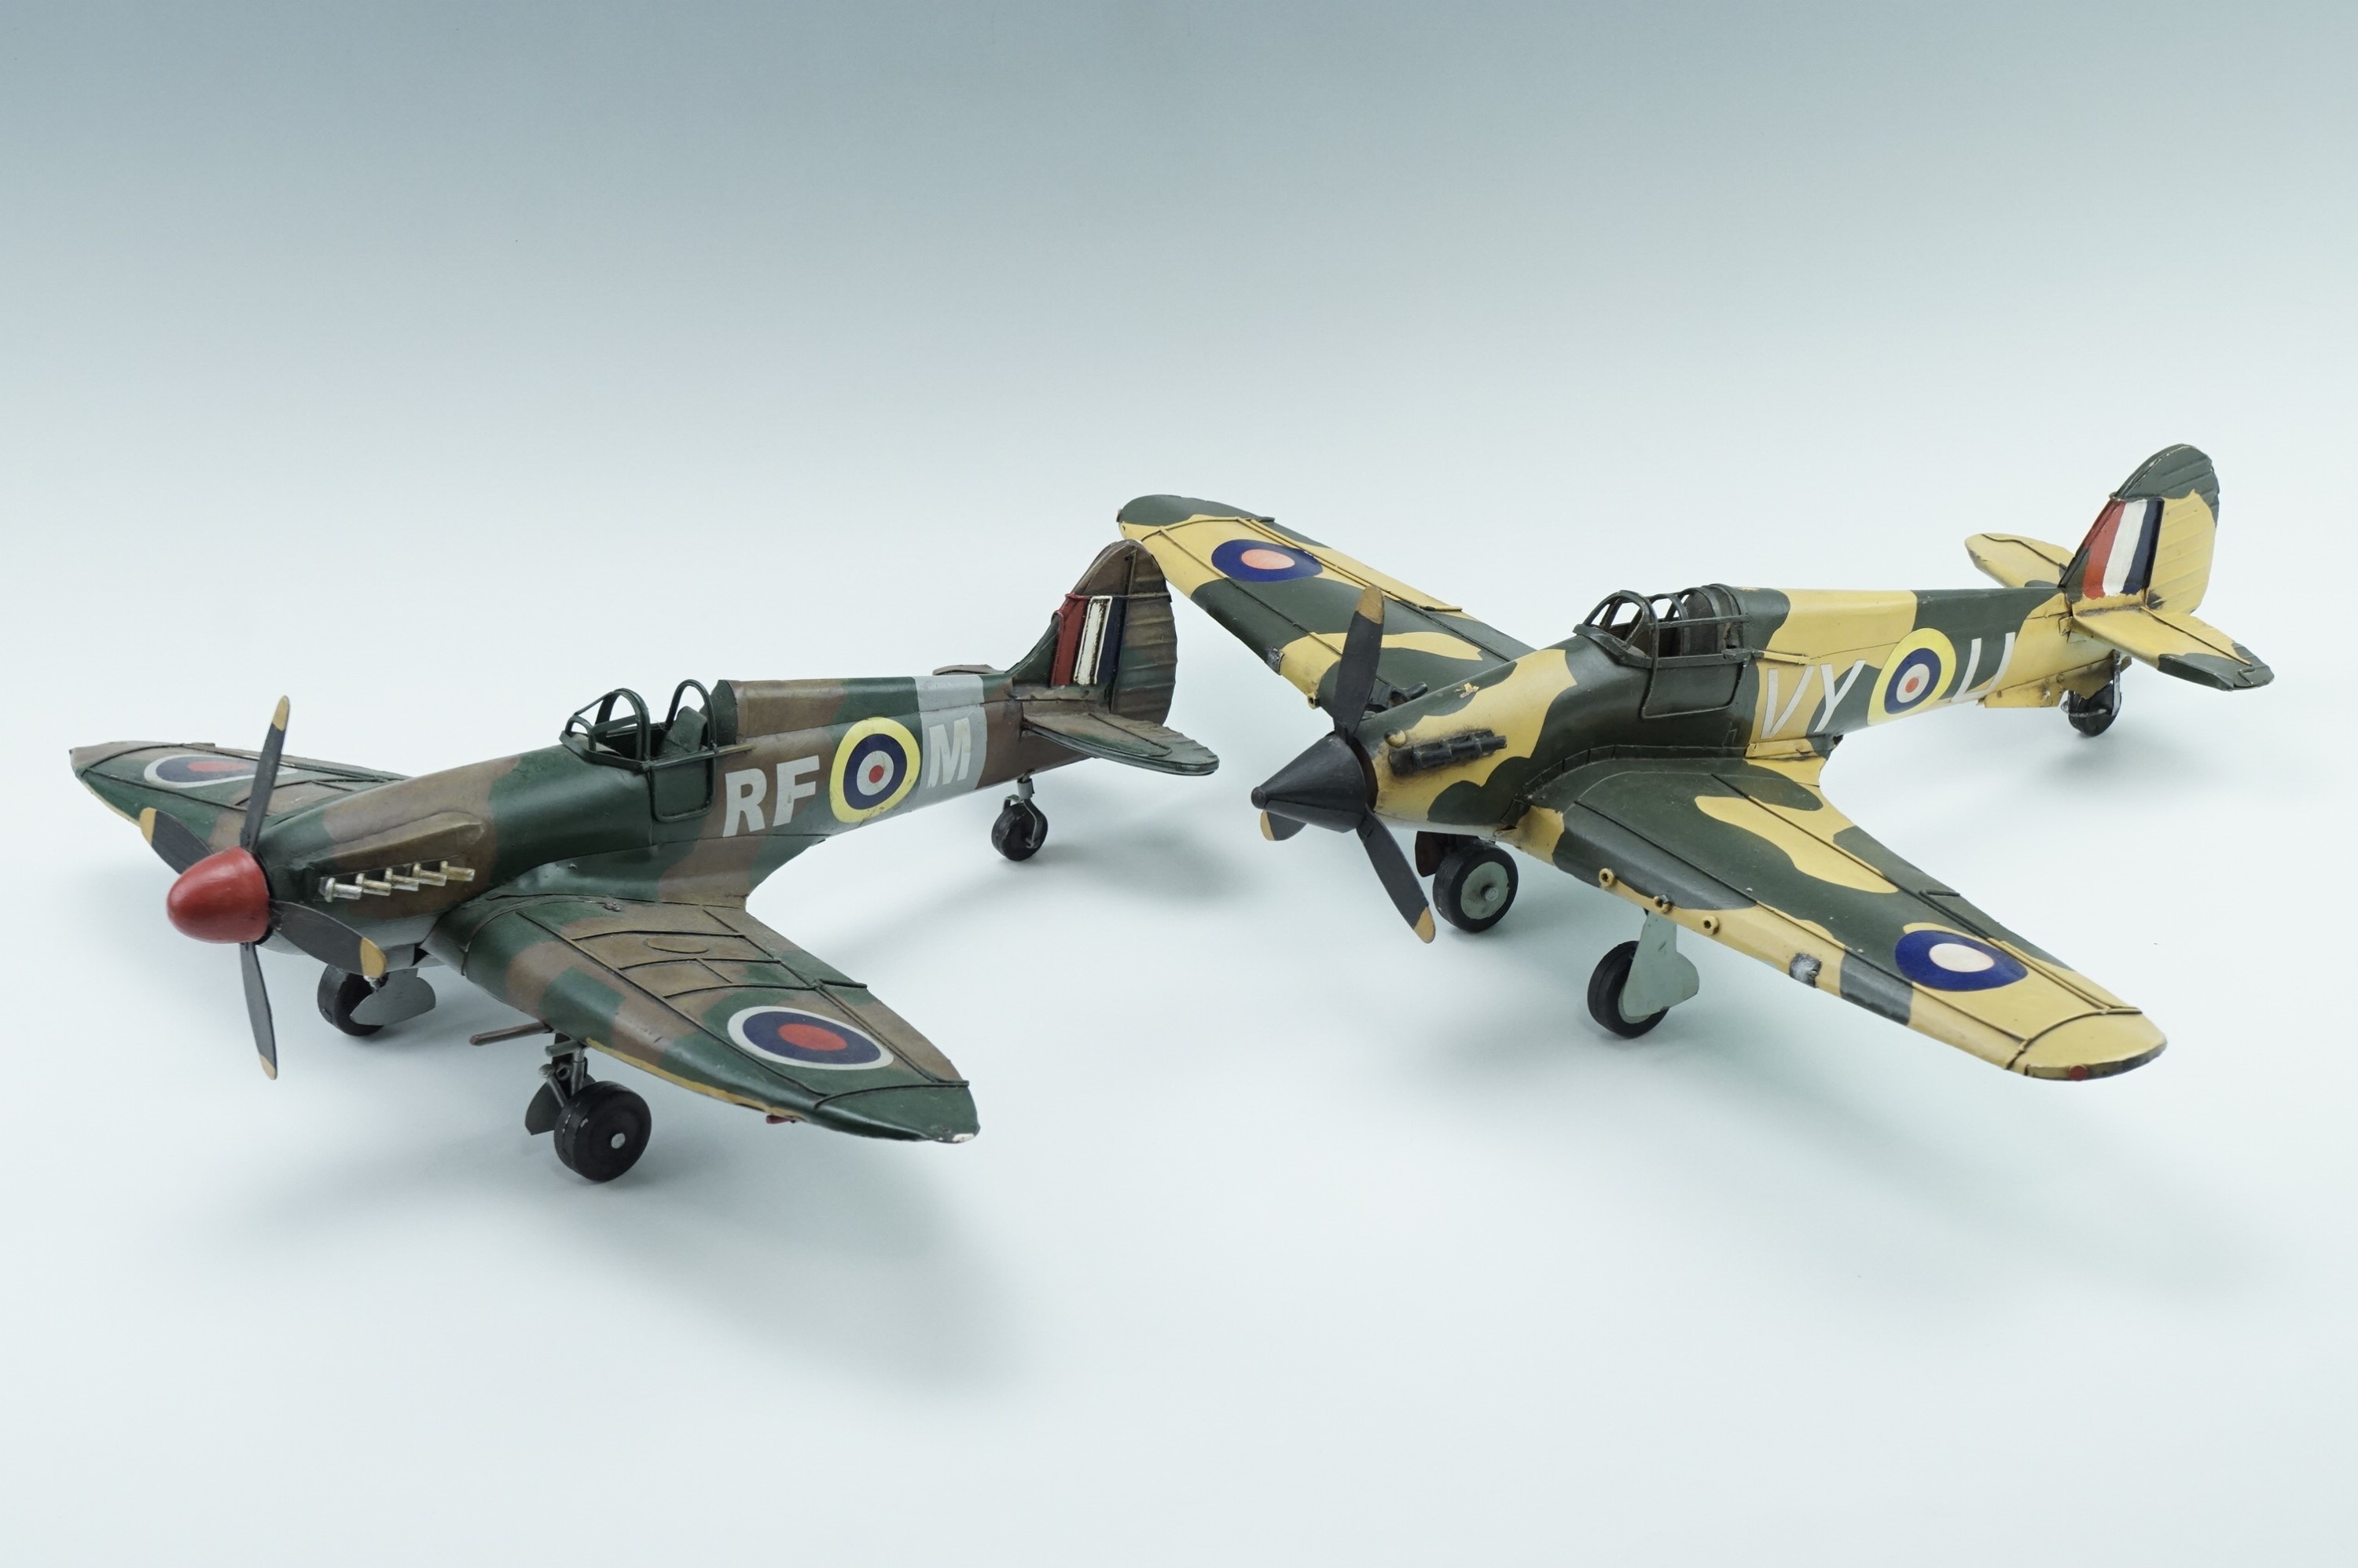 Two vintage tinplate style models of a Spitfire and a Hurricane, 43 cm